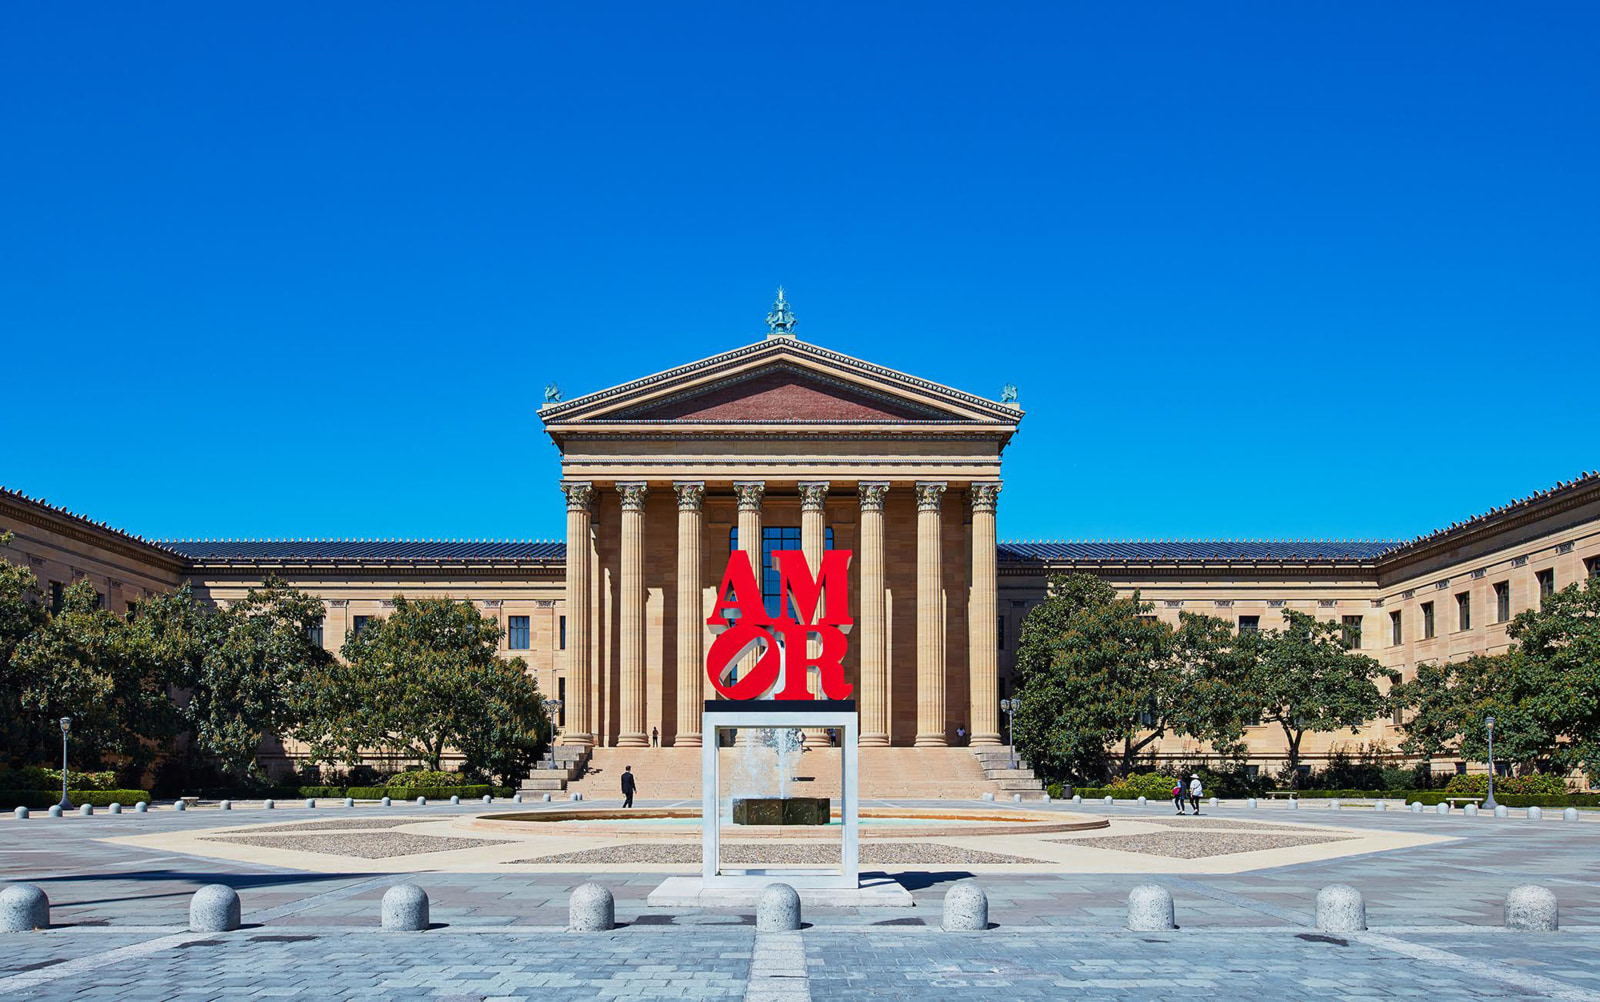 Indiana&amp;rsquo;s sculpture AMOR (1998) installed outside the Philadelphia Museum of Art in September 2015, on the occasion of the visit of Pope Francis I to Philadelphia. Photo: Courtesy of Tom Powel Imaging